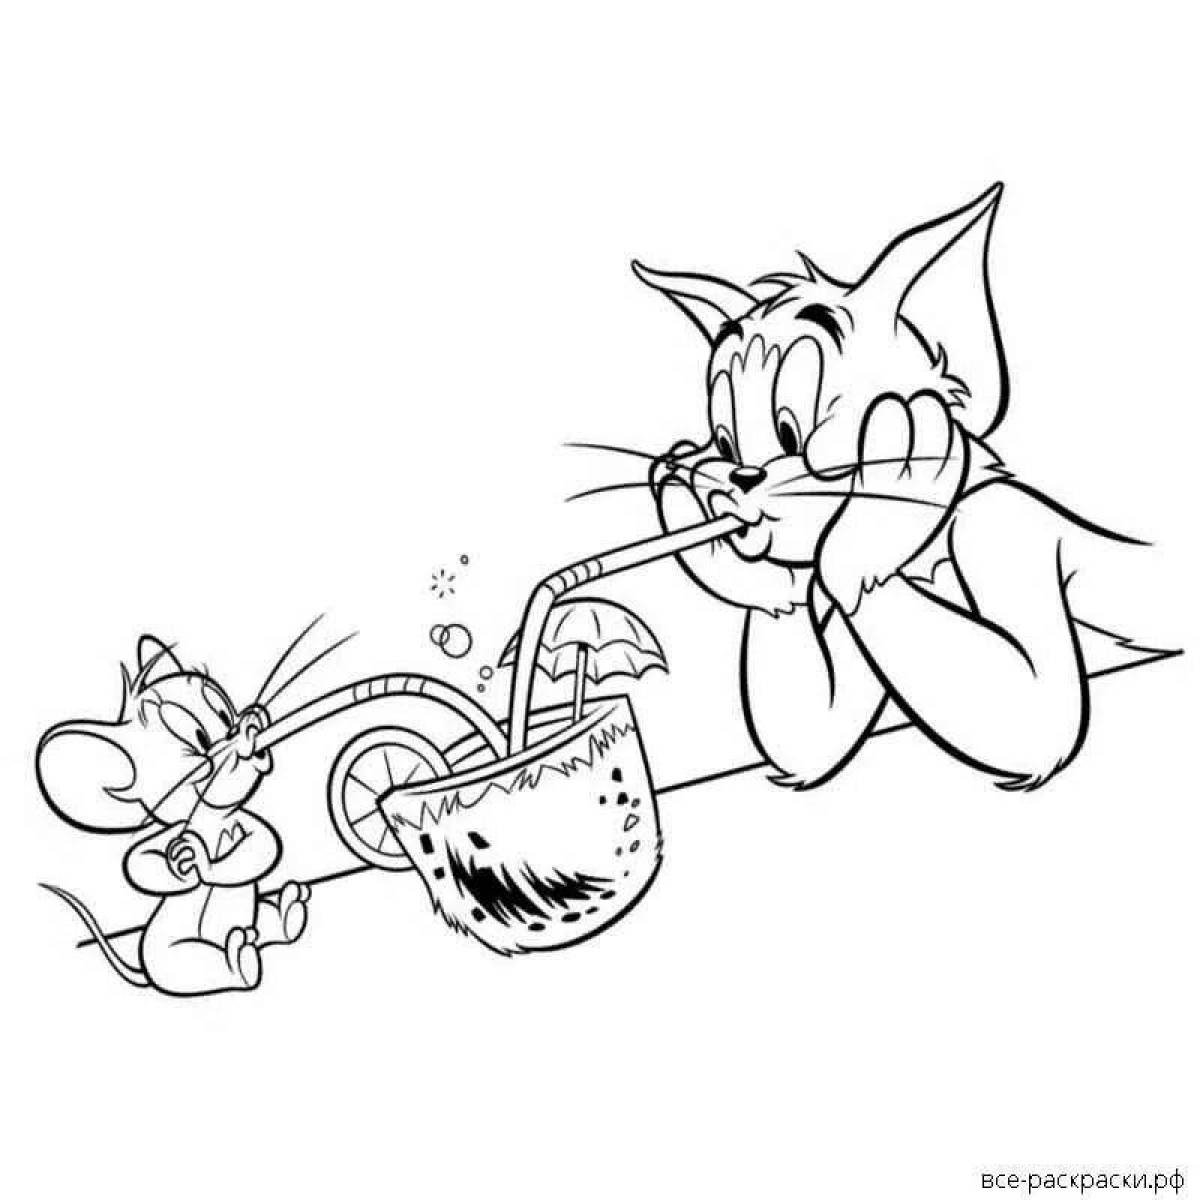 Tom and jerry game #4